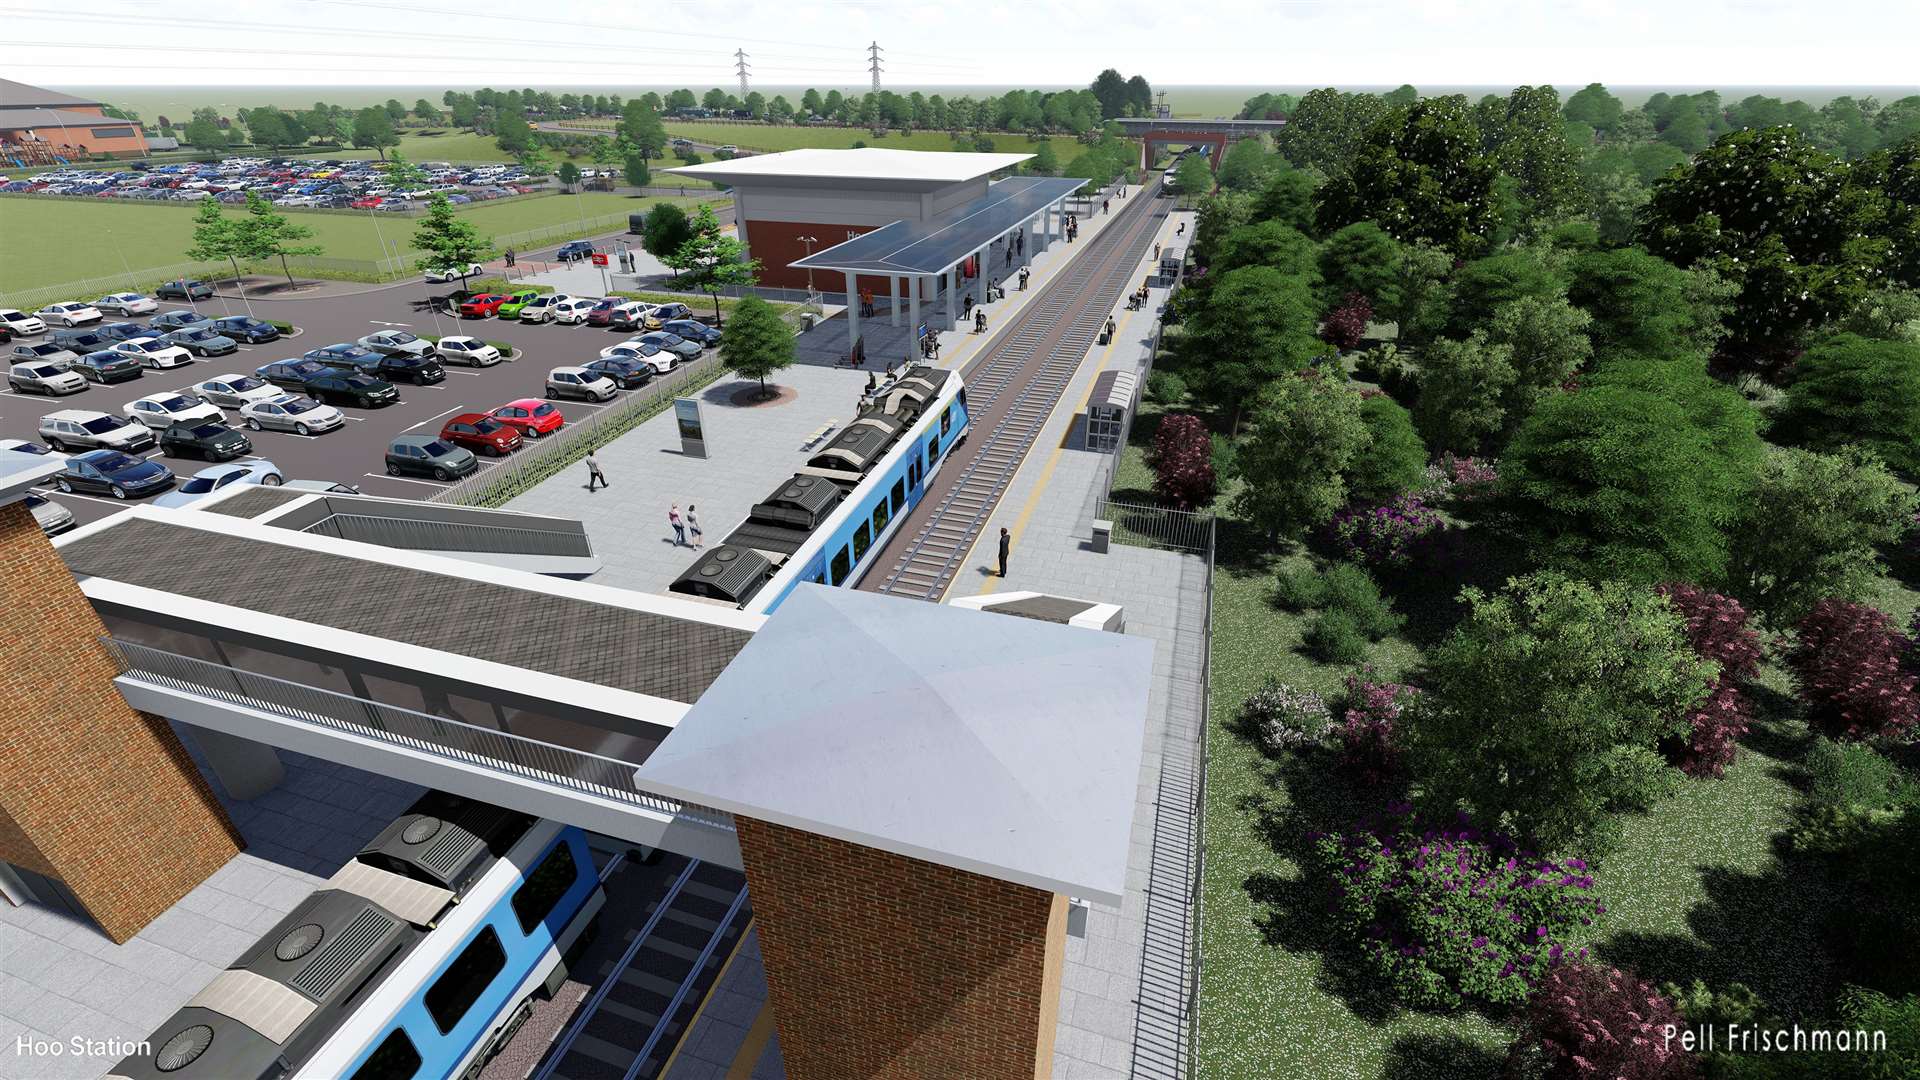 The HIF development on Hoo includes a £60m railway station at Sharnal Street